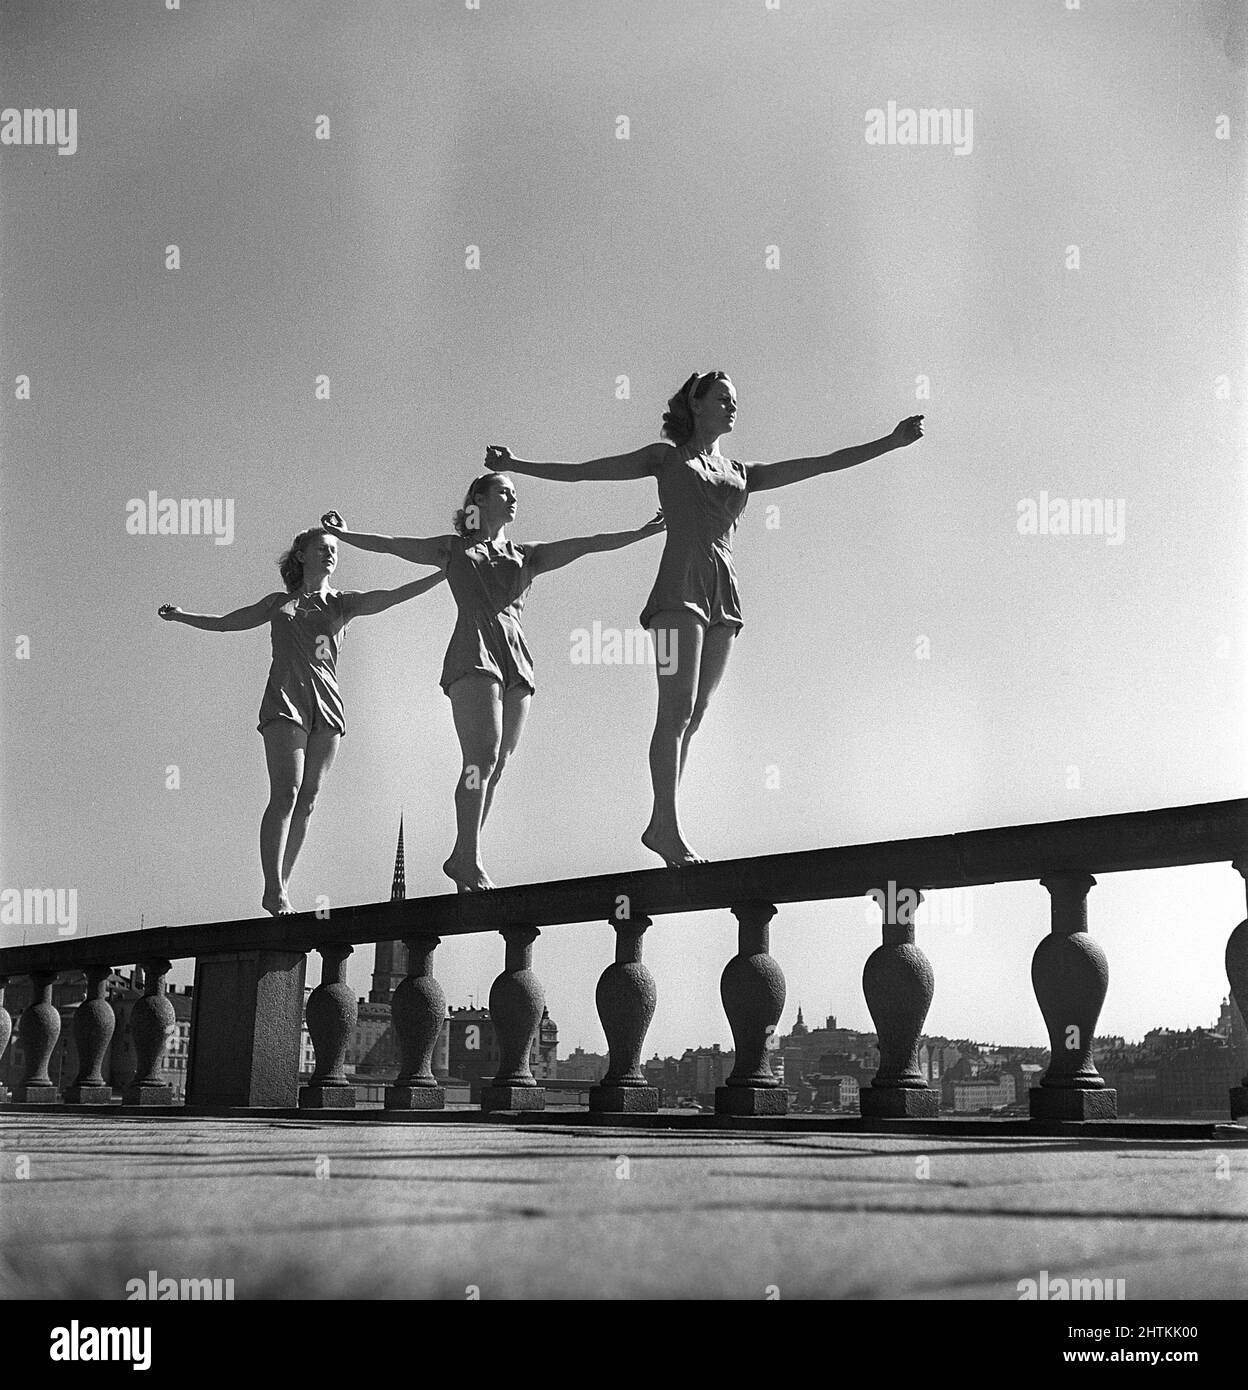 Gymnastics in the 1950s. Three young female gymnasts are standing on the wall outside Stockholm city hall. The three hold their arms legs and body in the same position. Sweden Photo Kristoffersson ref CZ67-9 Stock Photo